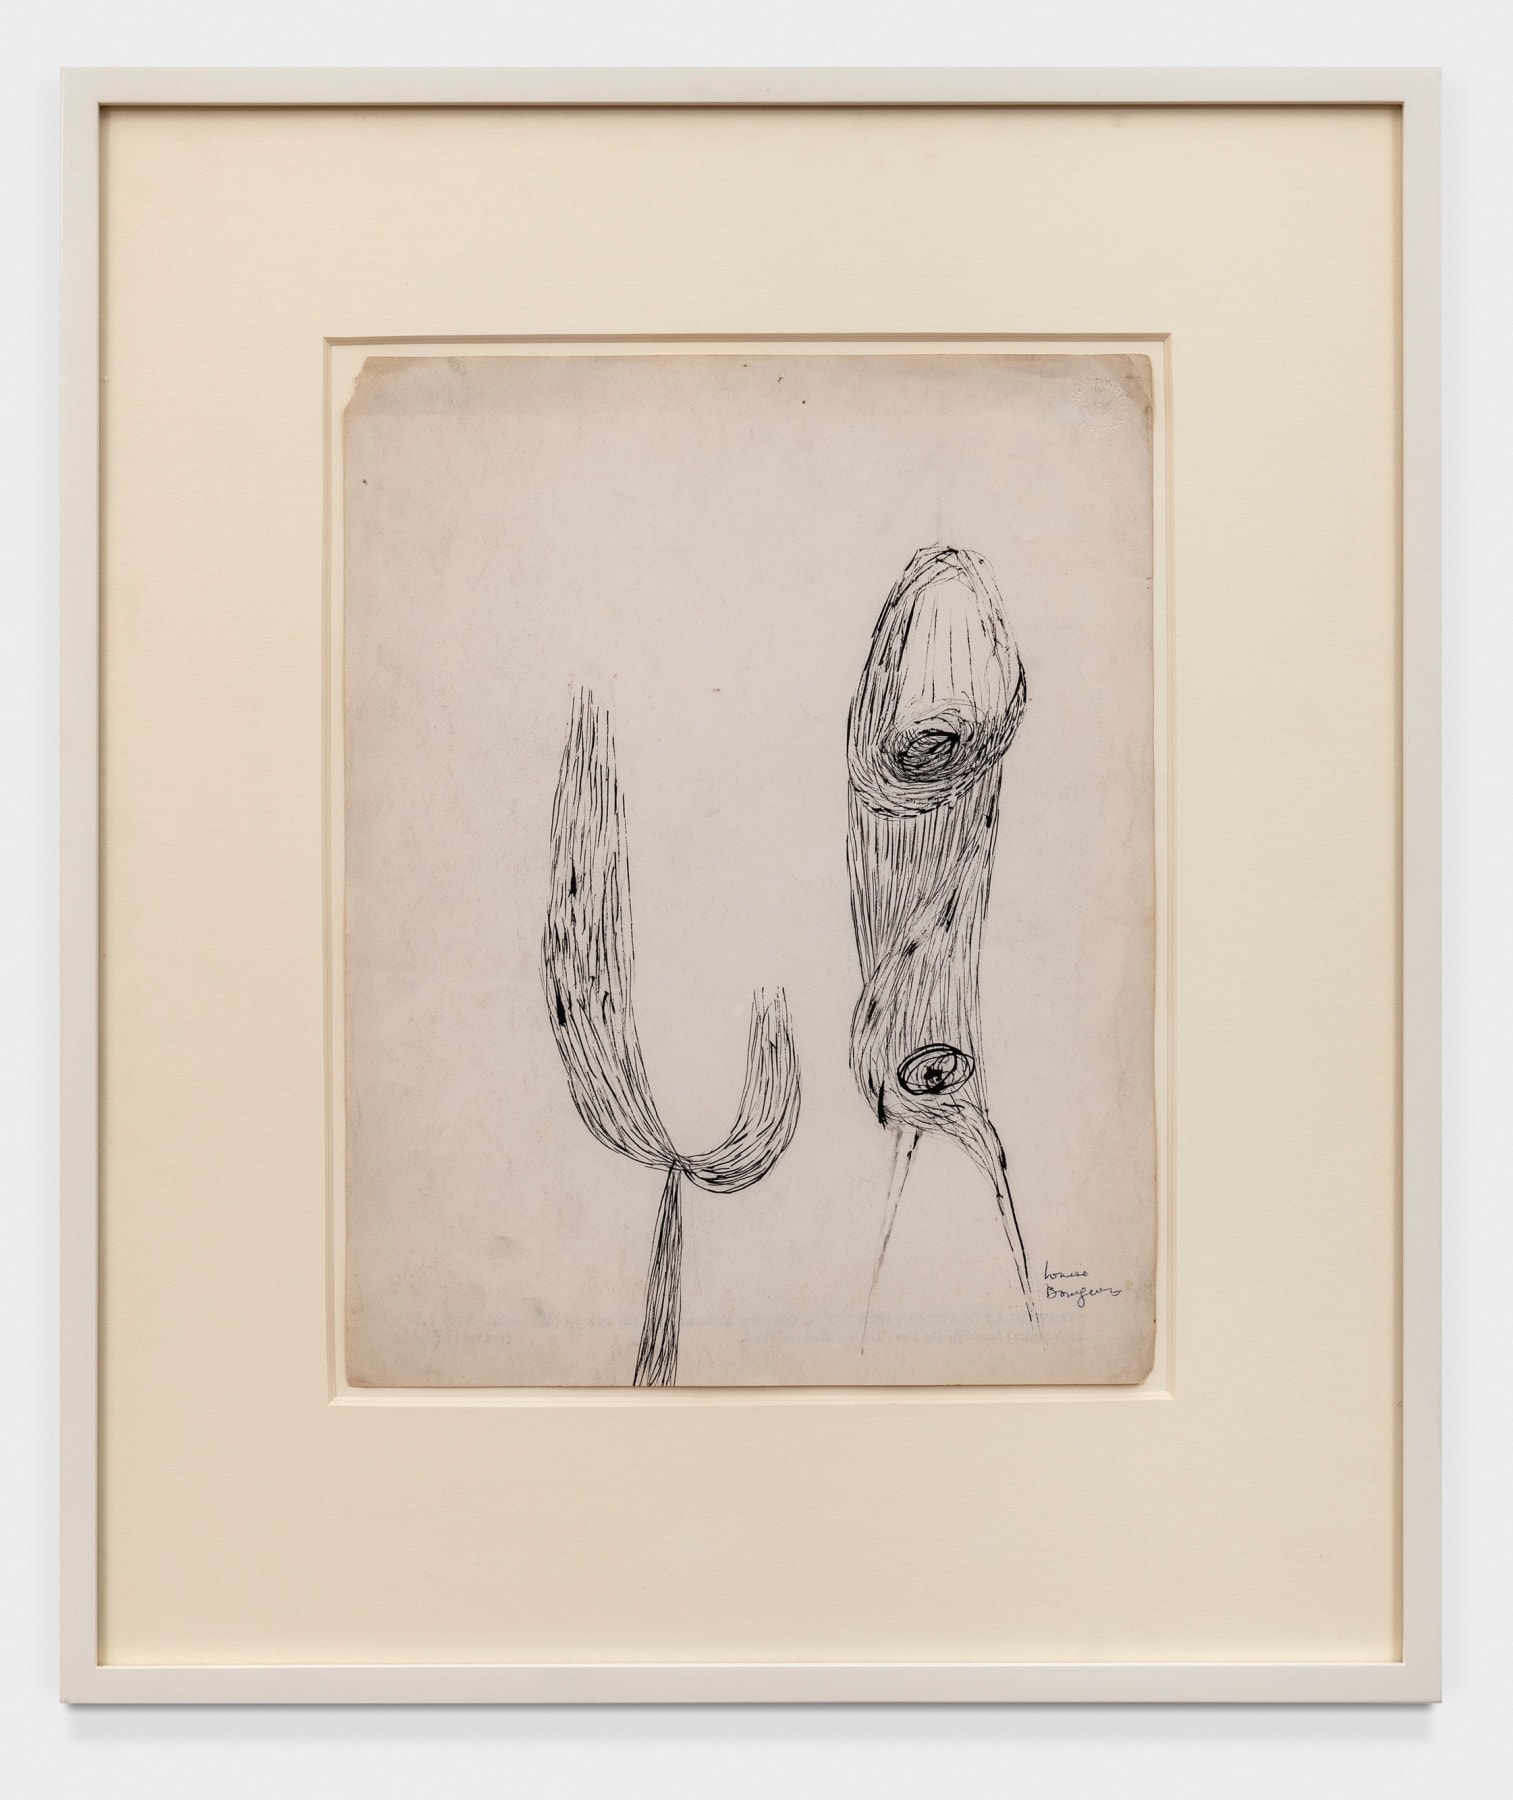 Louise Bourgeois - Artists - Peter Blum Gallery, New York